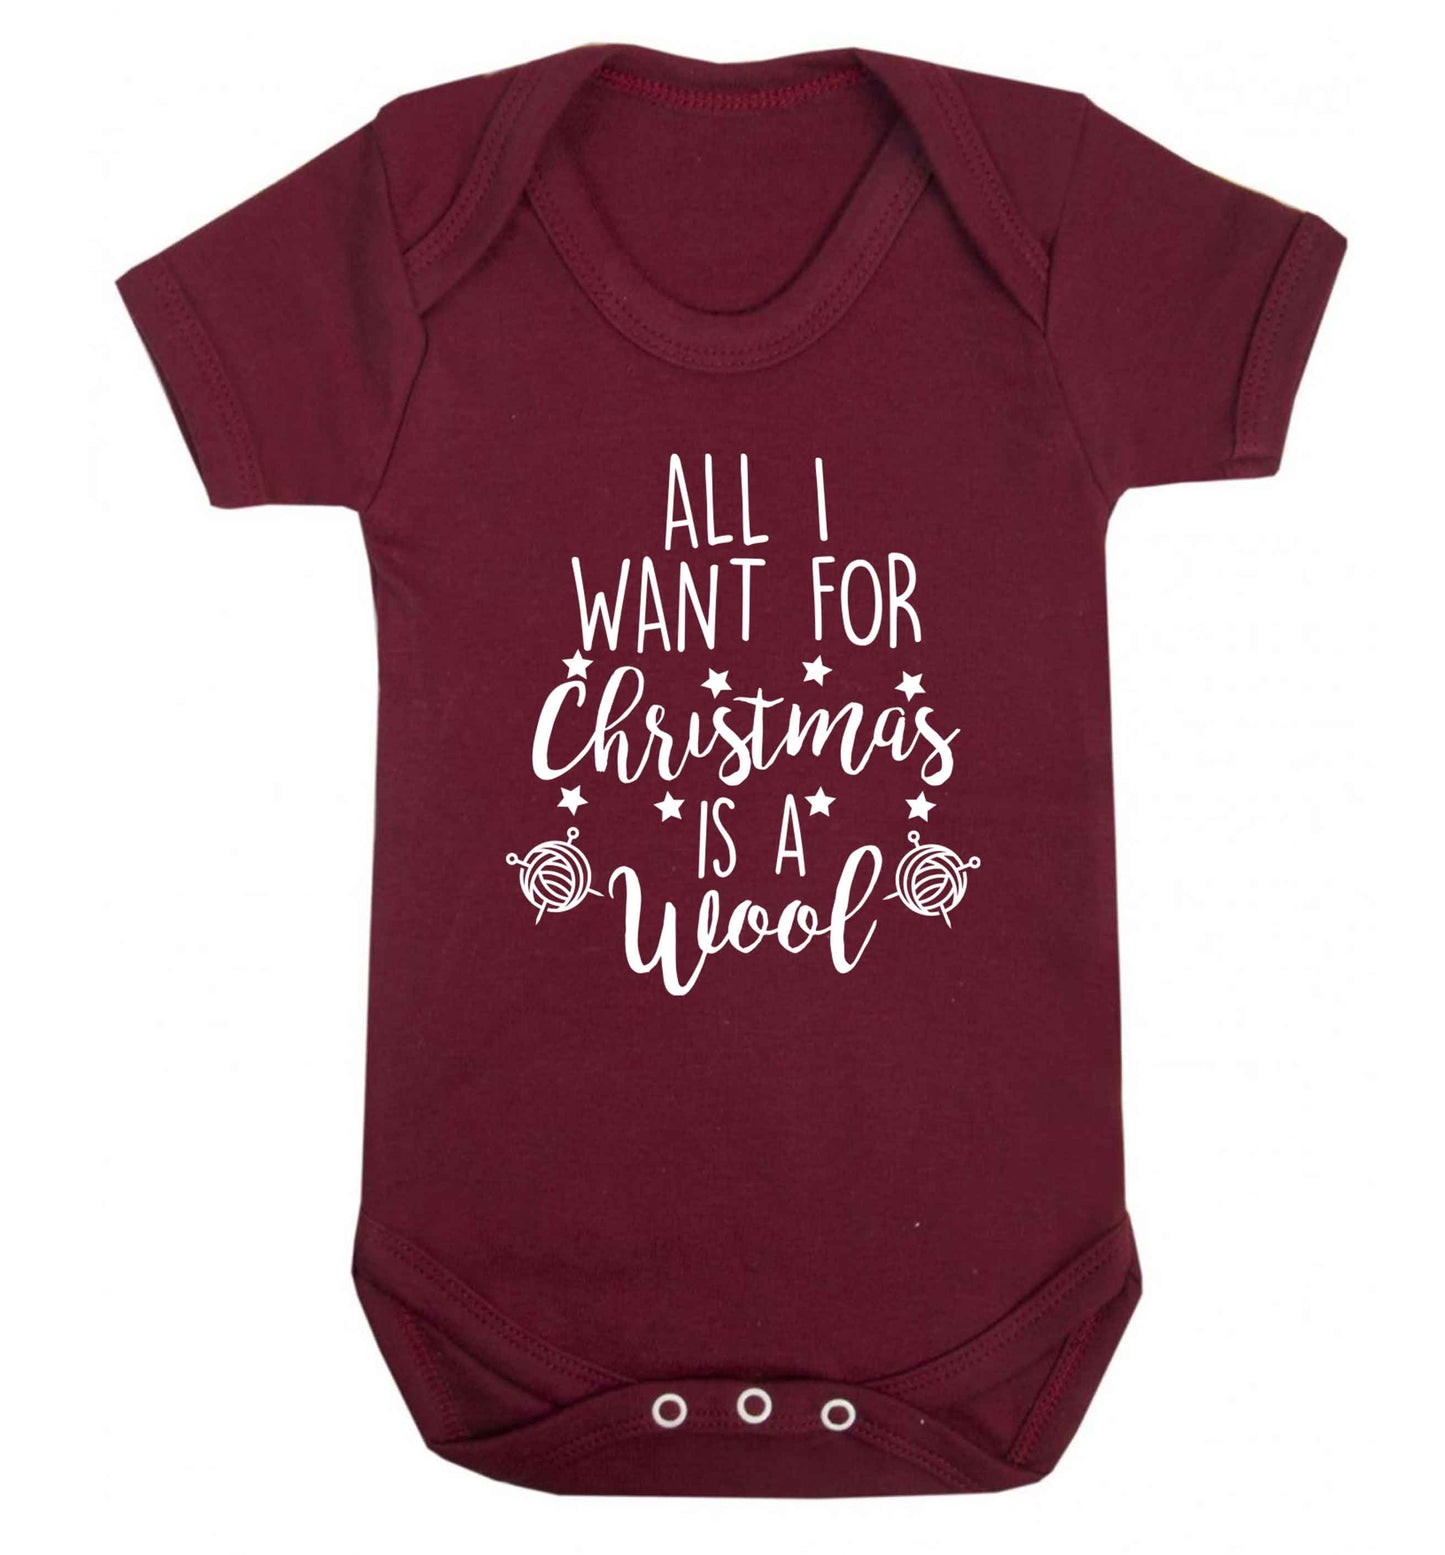 All I want for Christmas is wool! Baby Vest maroon 18-24 months